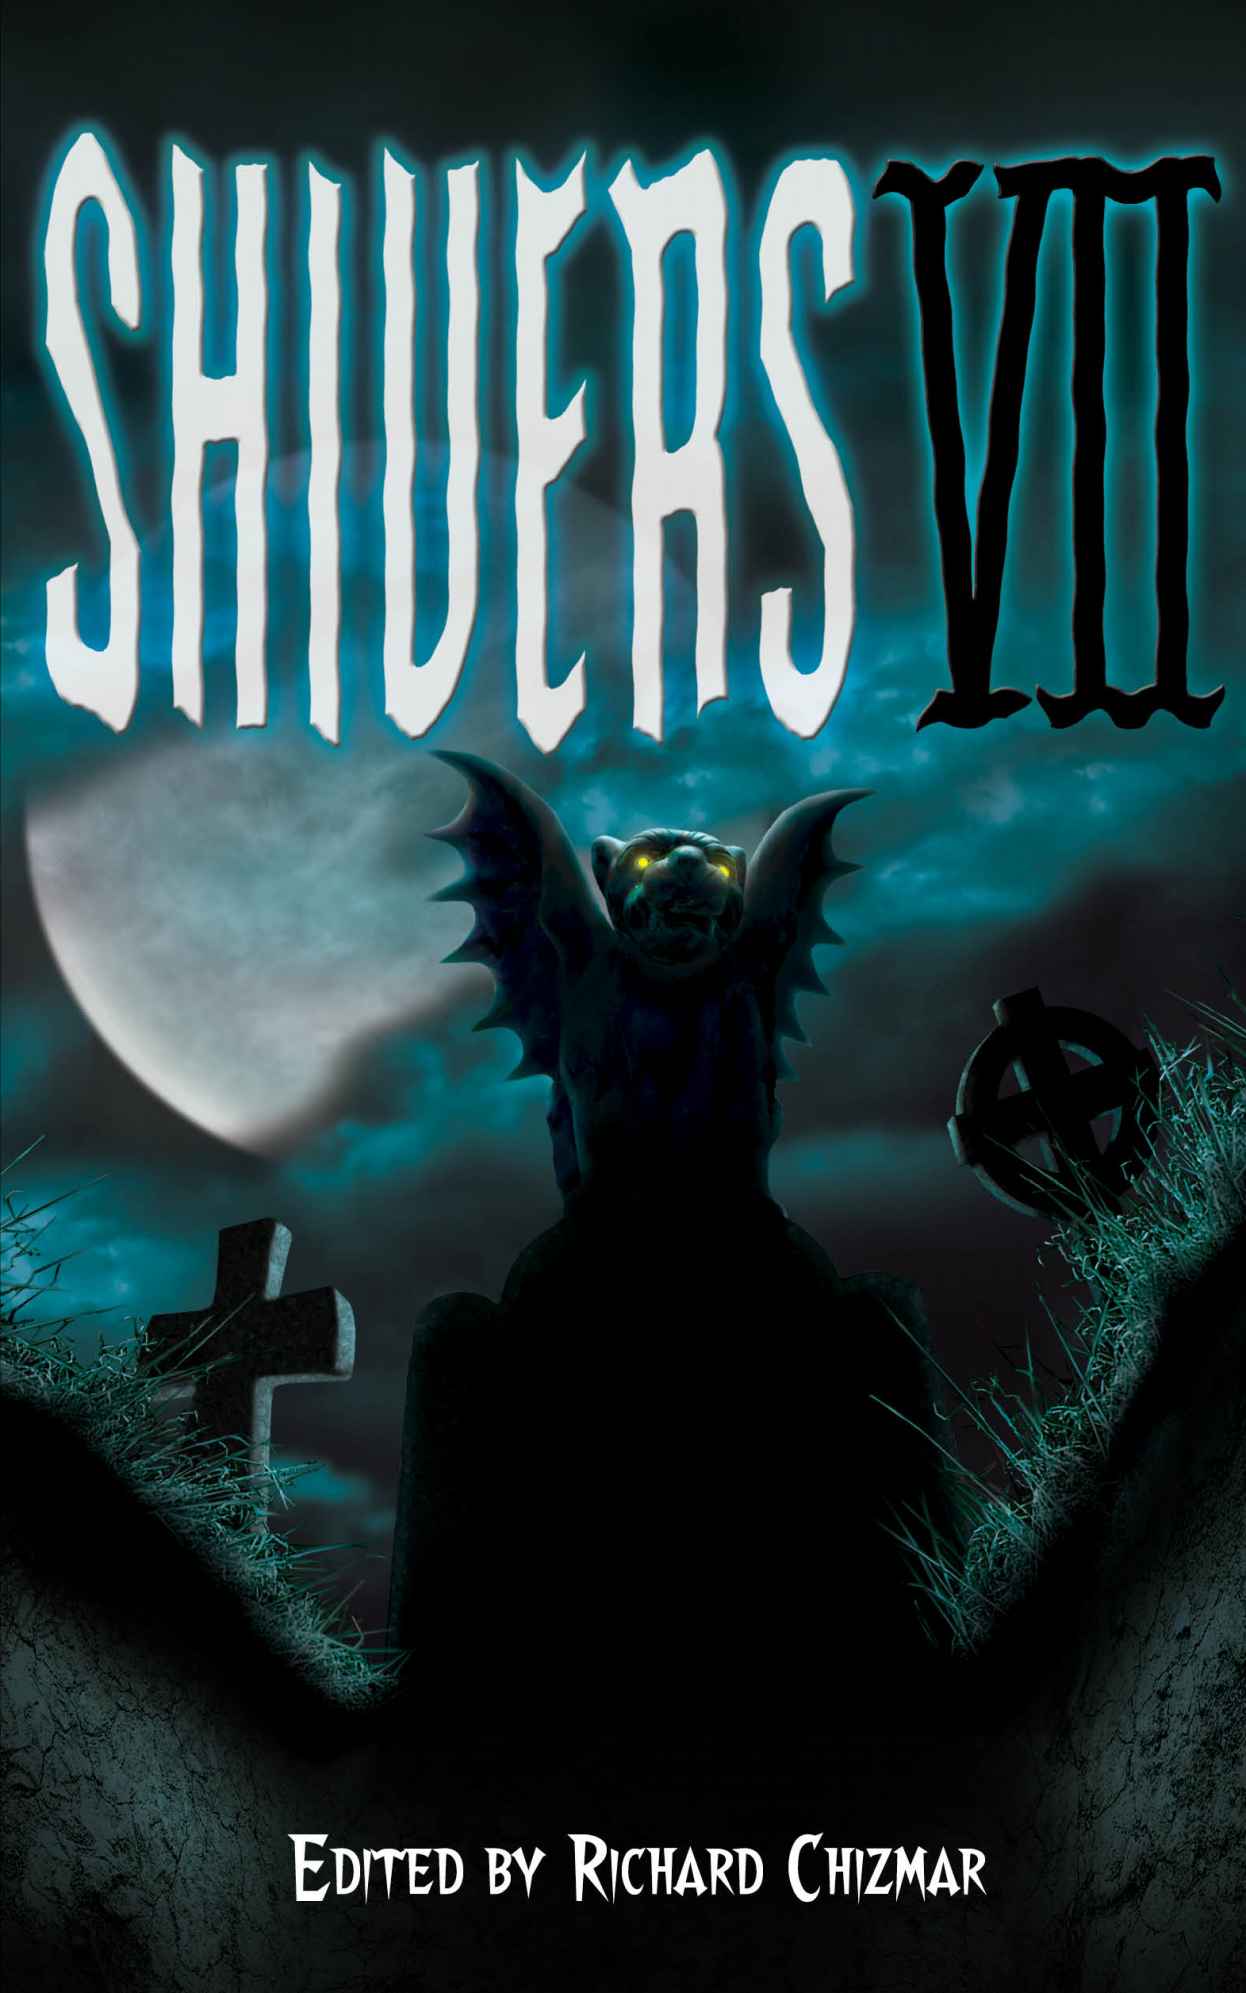 Shivers 7 by Clive Barker